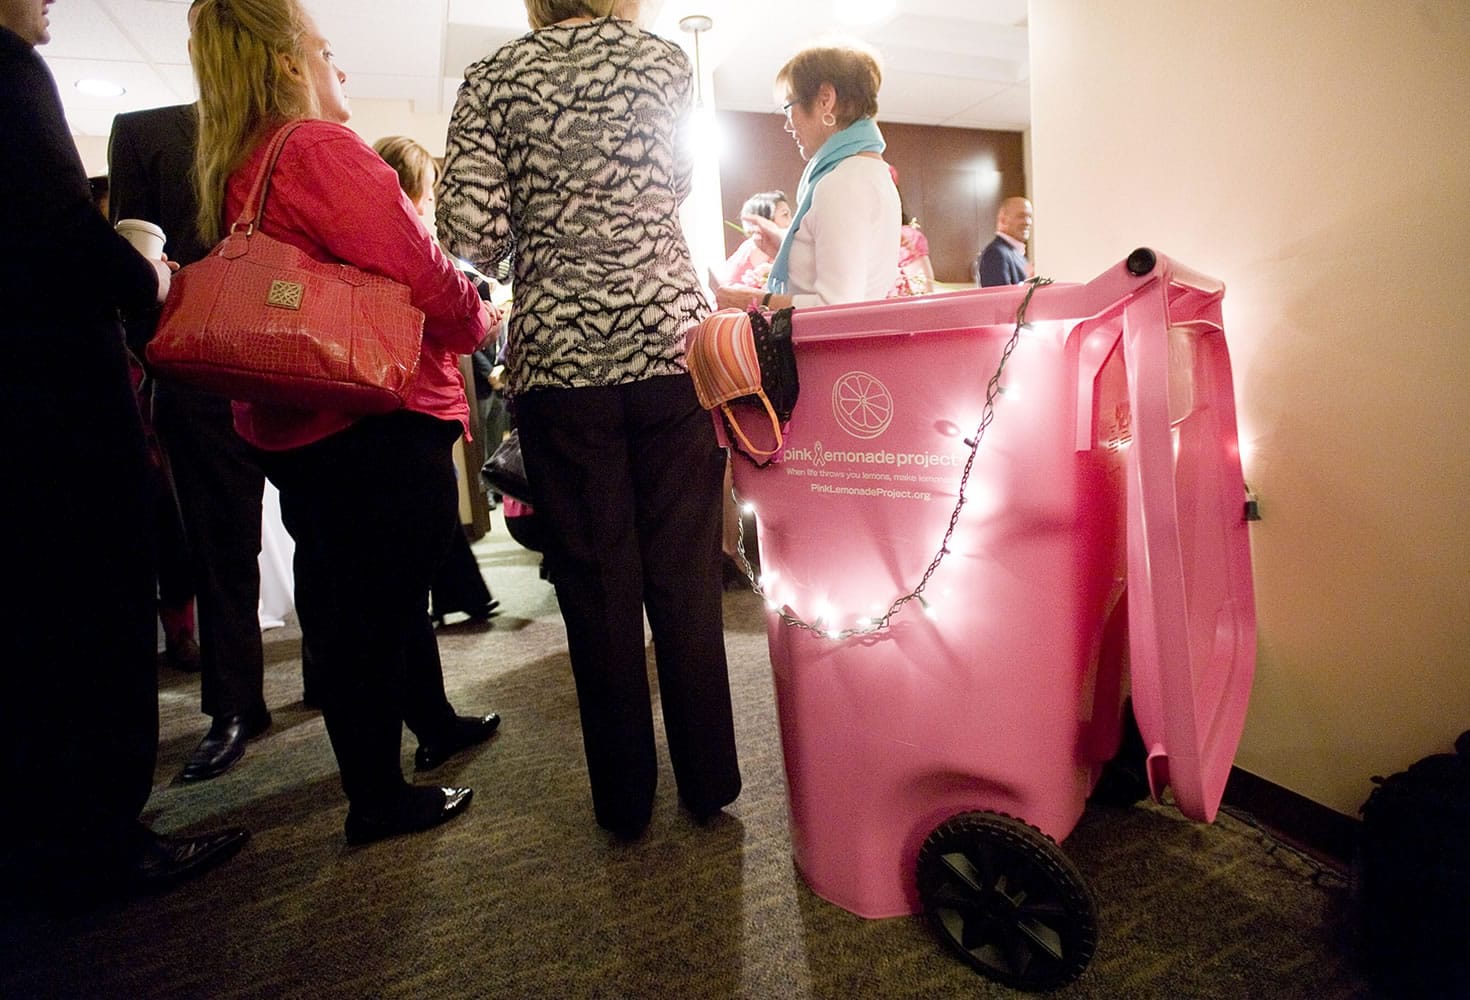 The Vancouver-based Pink Lemonade Project this week began selling pink recycle bins as its latest fundraiser. The bins, donated by Waste Connections, can be purchased with a minimum donation of $200.